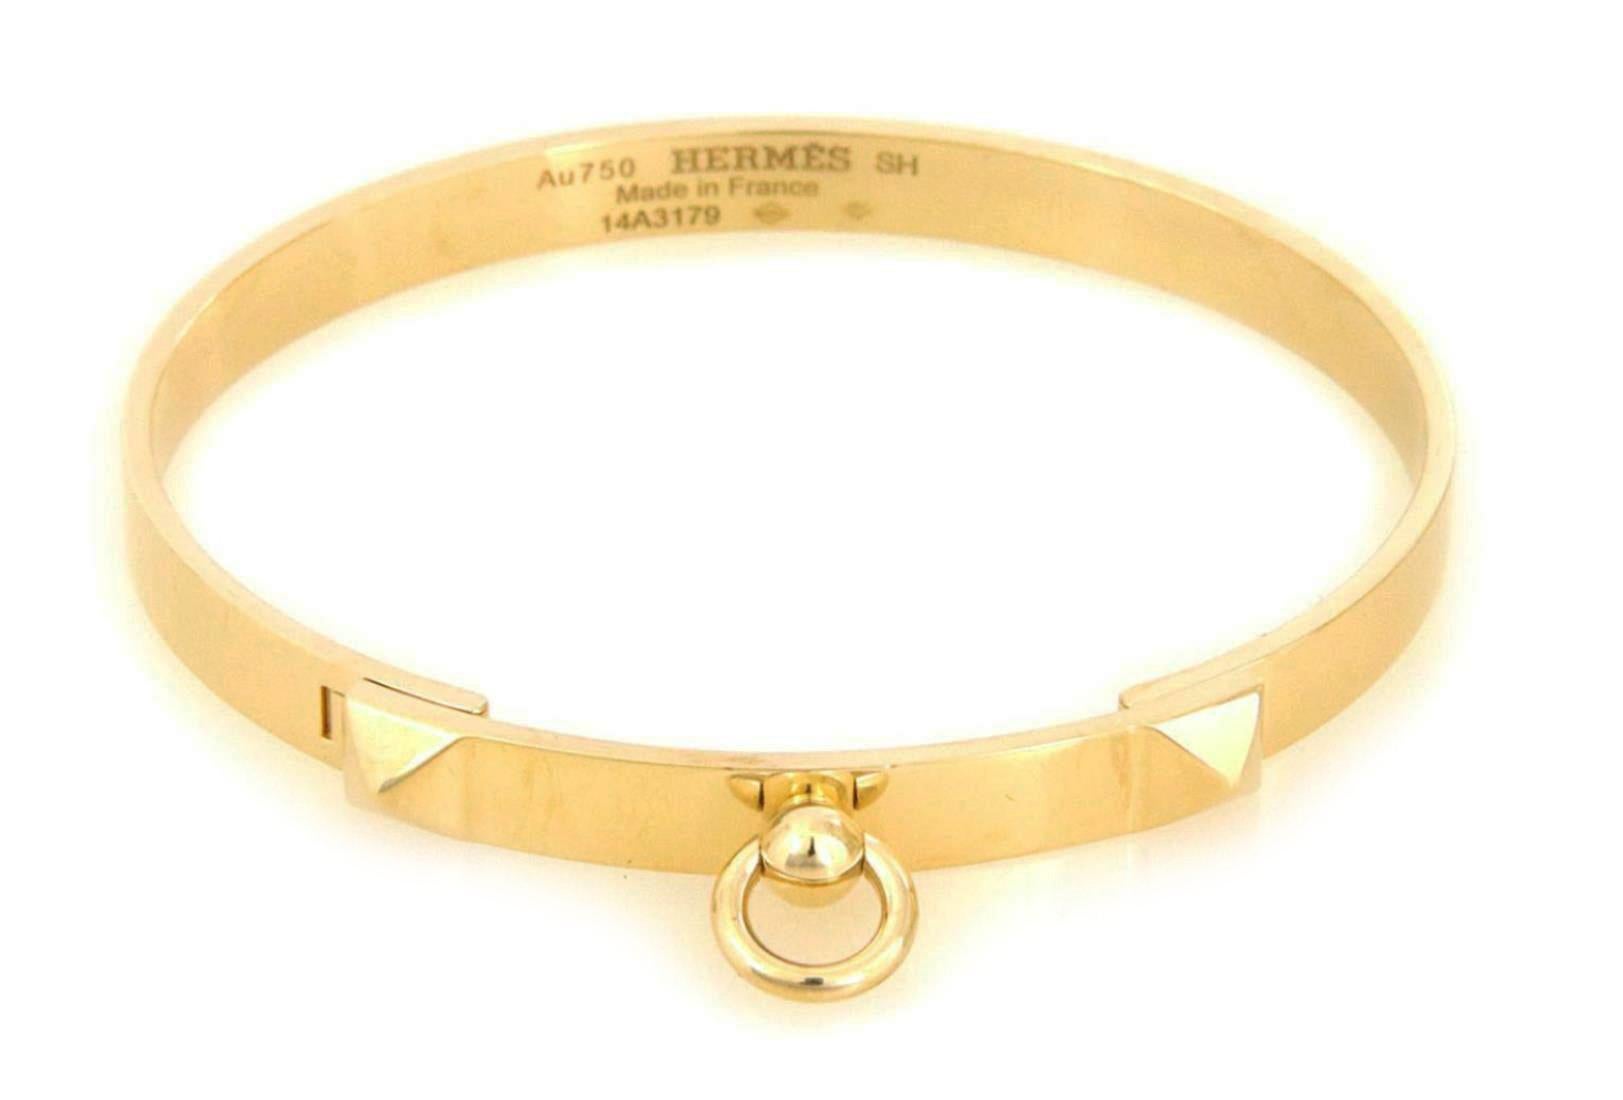 Chic and authentic by Hermes from the Collier de Chien Collection. This elegant bangle is crafted from 18k yellow gold in a high polished finish featuring a long 6mm wide bar across the front decorated with a pyramid shape on each end of the bar.